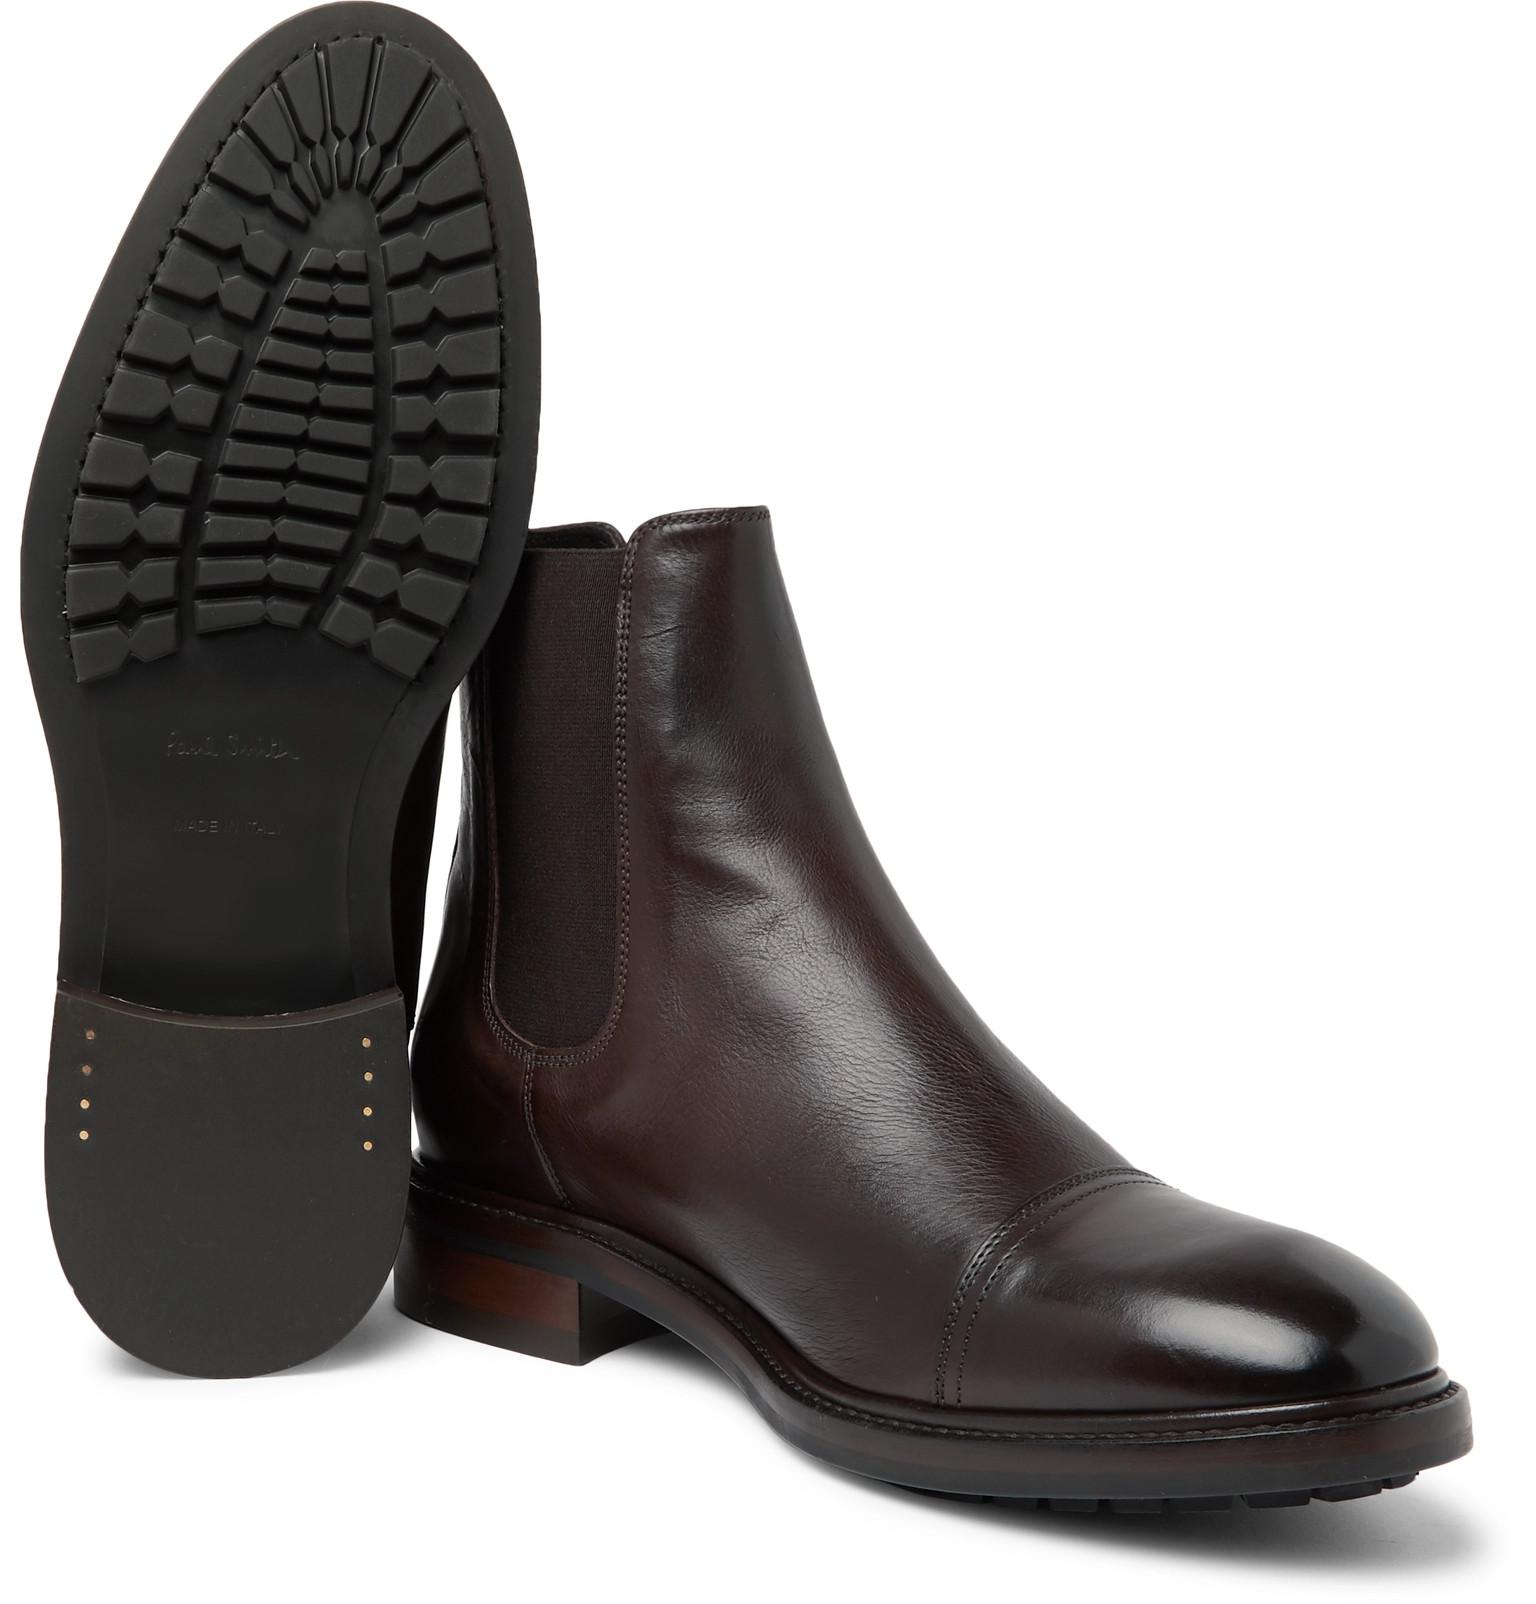 Paul Smith Chelsea Boots - www.inf-inet.com